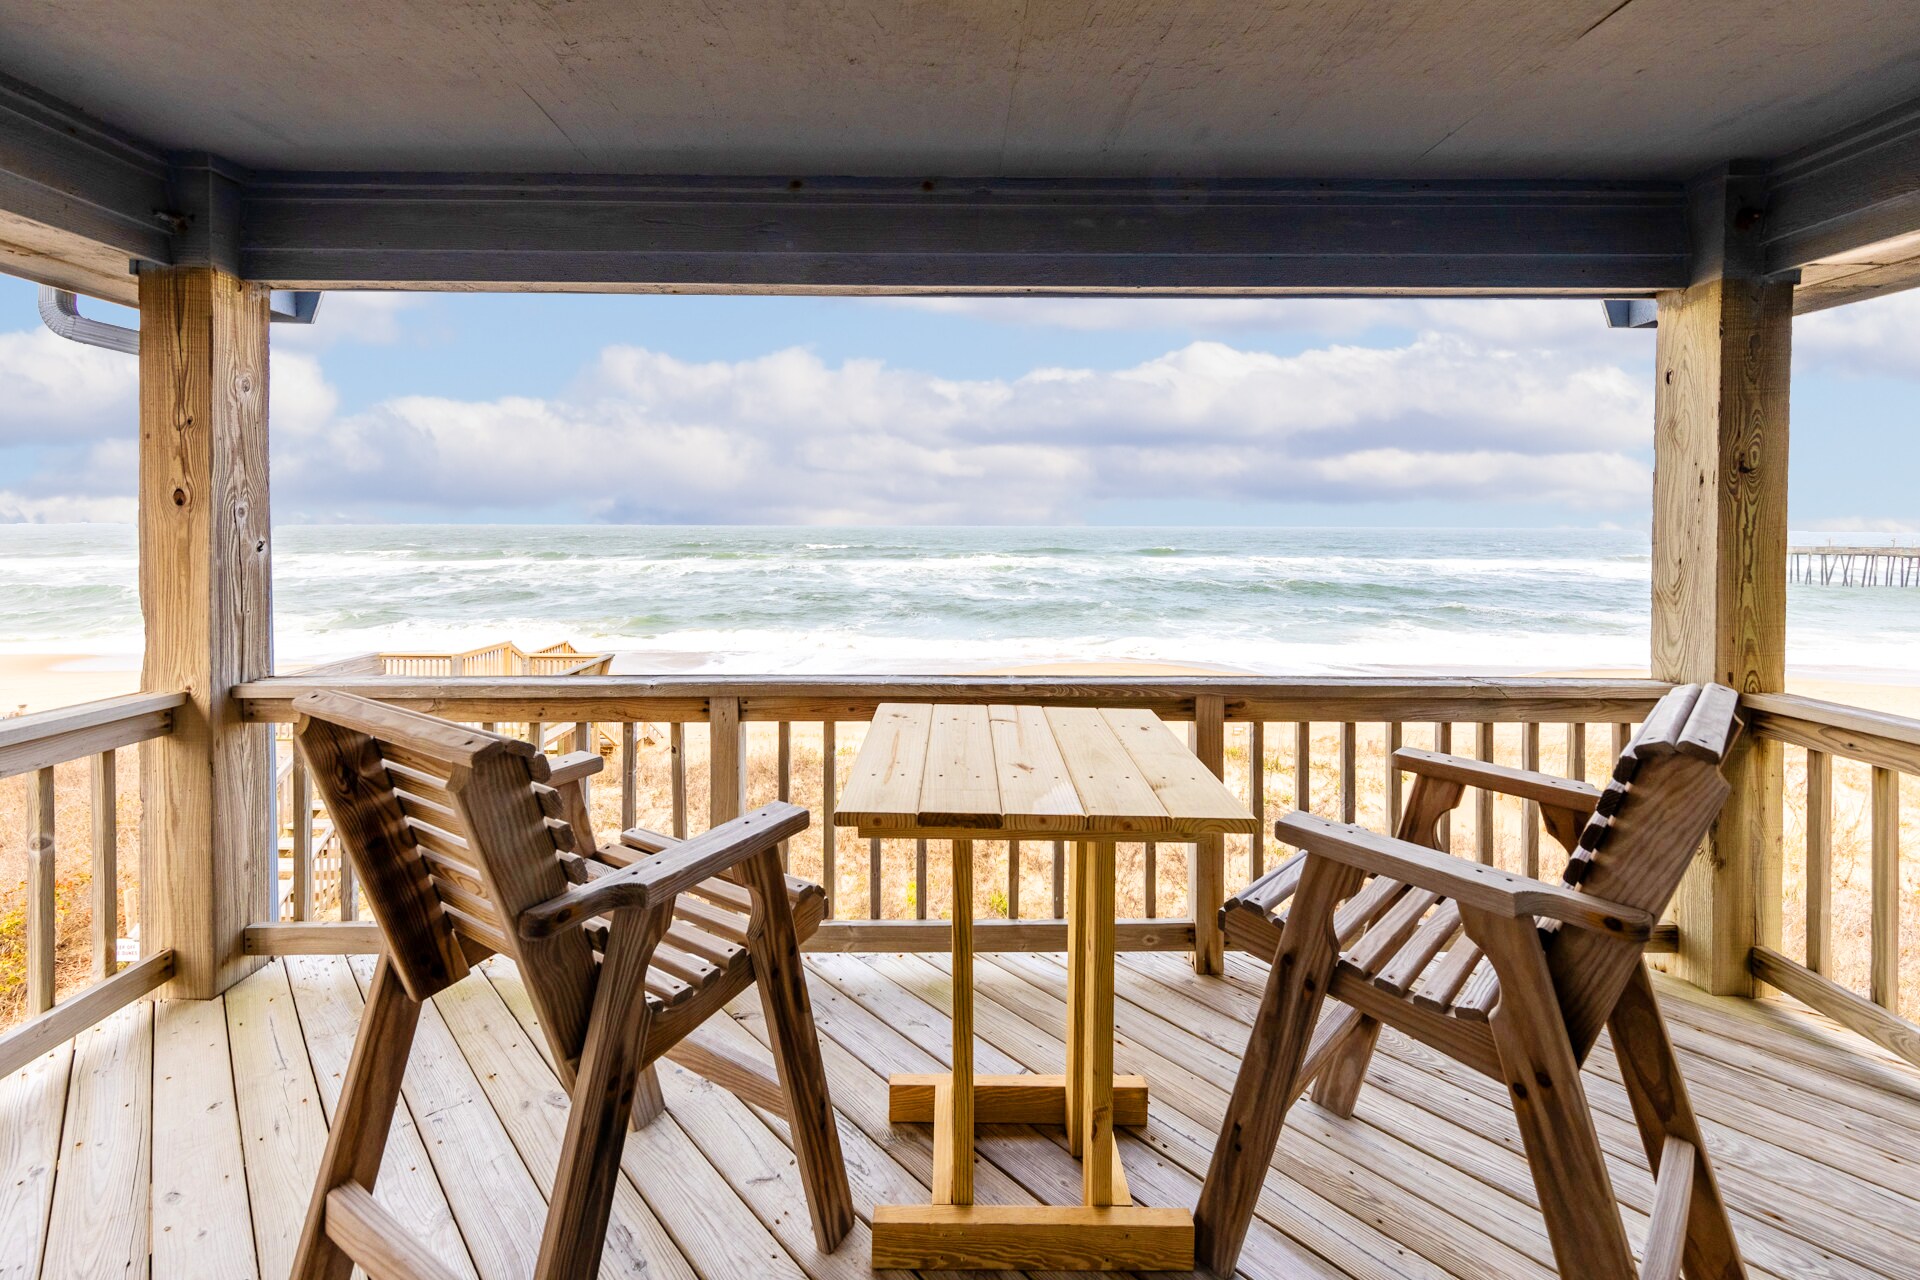 Panoramic ocean views from the covered decks!